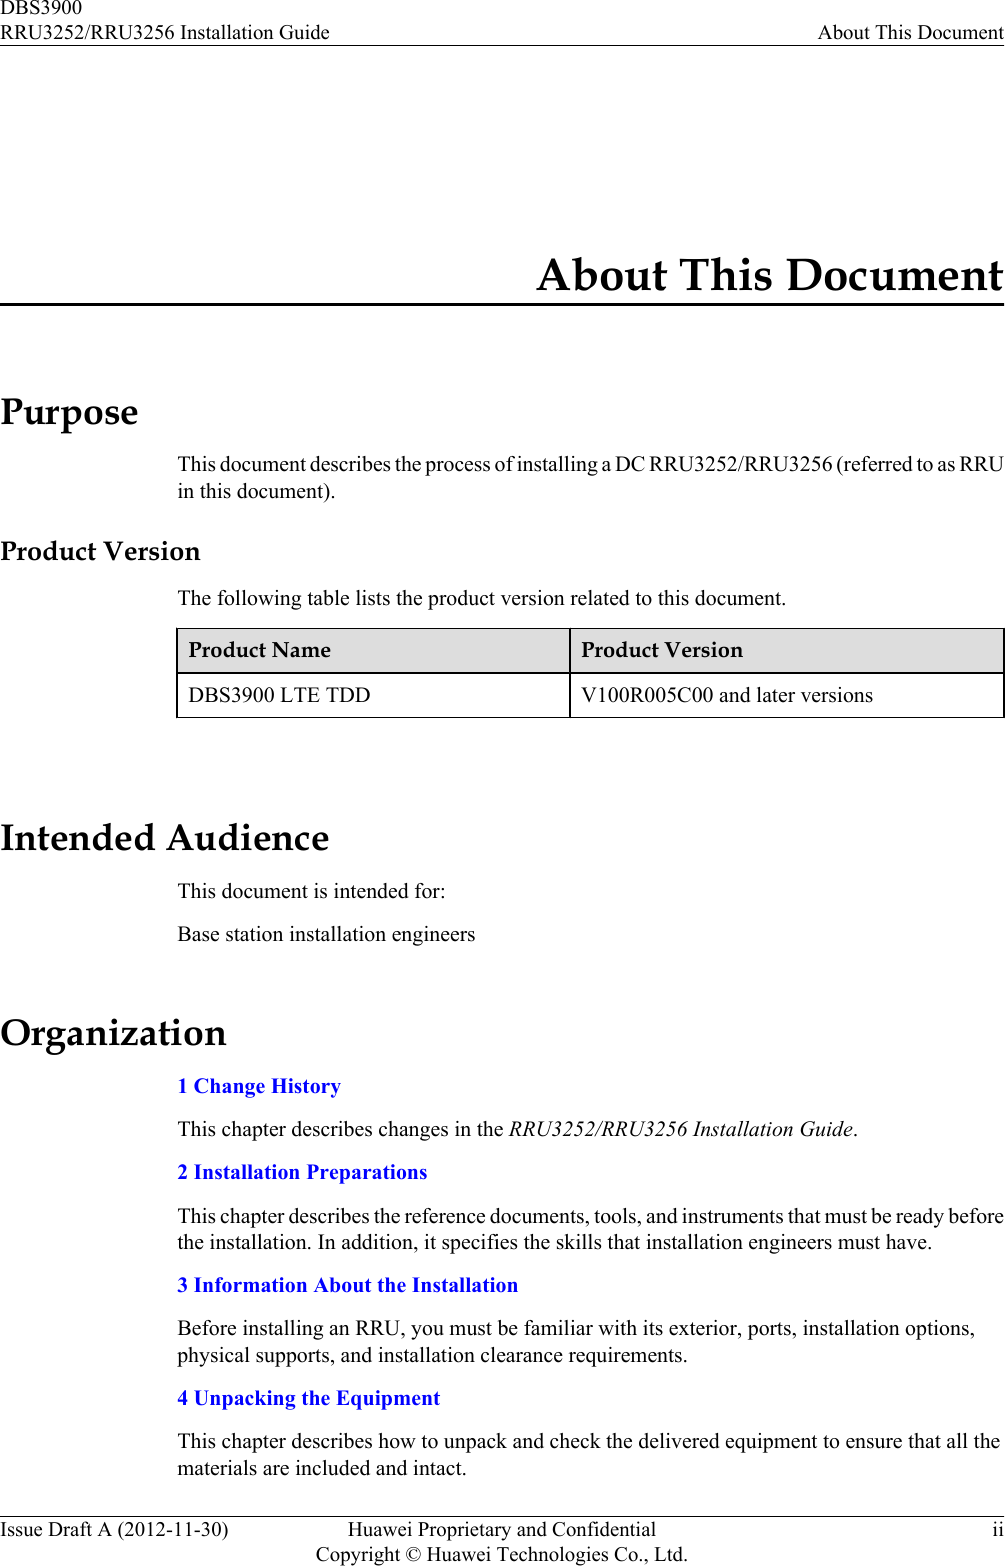 About This DocumentPurposeThis document describes the process of installing a DC RRU3252/RRU3256 (referred to as RRUin this document).Product VersionThe following table lists the product version related to this document.Product Name Product VersionDBS3900 LTE TDD V100R005C00 and later versions Intended AudienceThis document is intended for:Base station installation engineersOrganization1 Change HistoryThis chapter describes changes in the RRU3252/RRU3256 Installation Guide.2 Installation PreparationsThis chapter describes the reference documents, tools, and instruments that must be ready beforethe installation. In addition, it specifies the skills that installation engineers must have.3 Information About the InstallationBefore installing an RRU, you must be familiar with its exterior, ports, installation options,physical supports, and installation clearance requirements.4 Unpacking the EquipmentThis chapter describes how to unpack and check the delivered equipment to ensure that all thematerials are included and intact.DBS3900RRU3252/RRU3256 Installation Guide About This DocumentIssue Draft A (2012-11-30) Huawei Proprietary and ConfidentialCopyright © Huawei Technologies Co., Ltd.ii